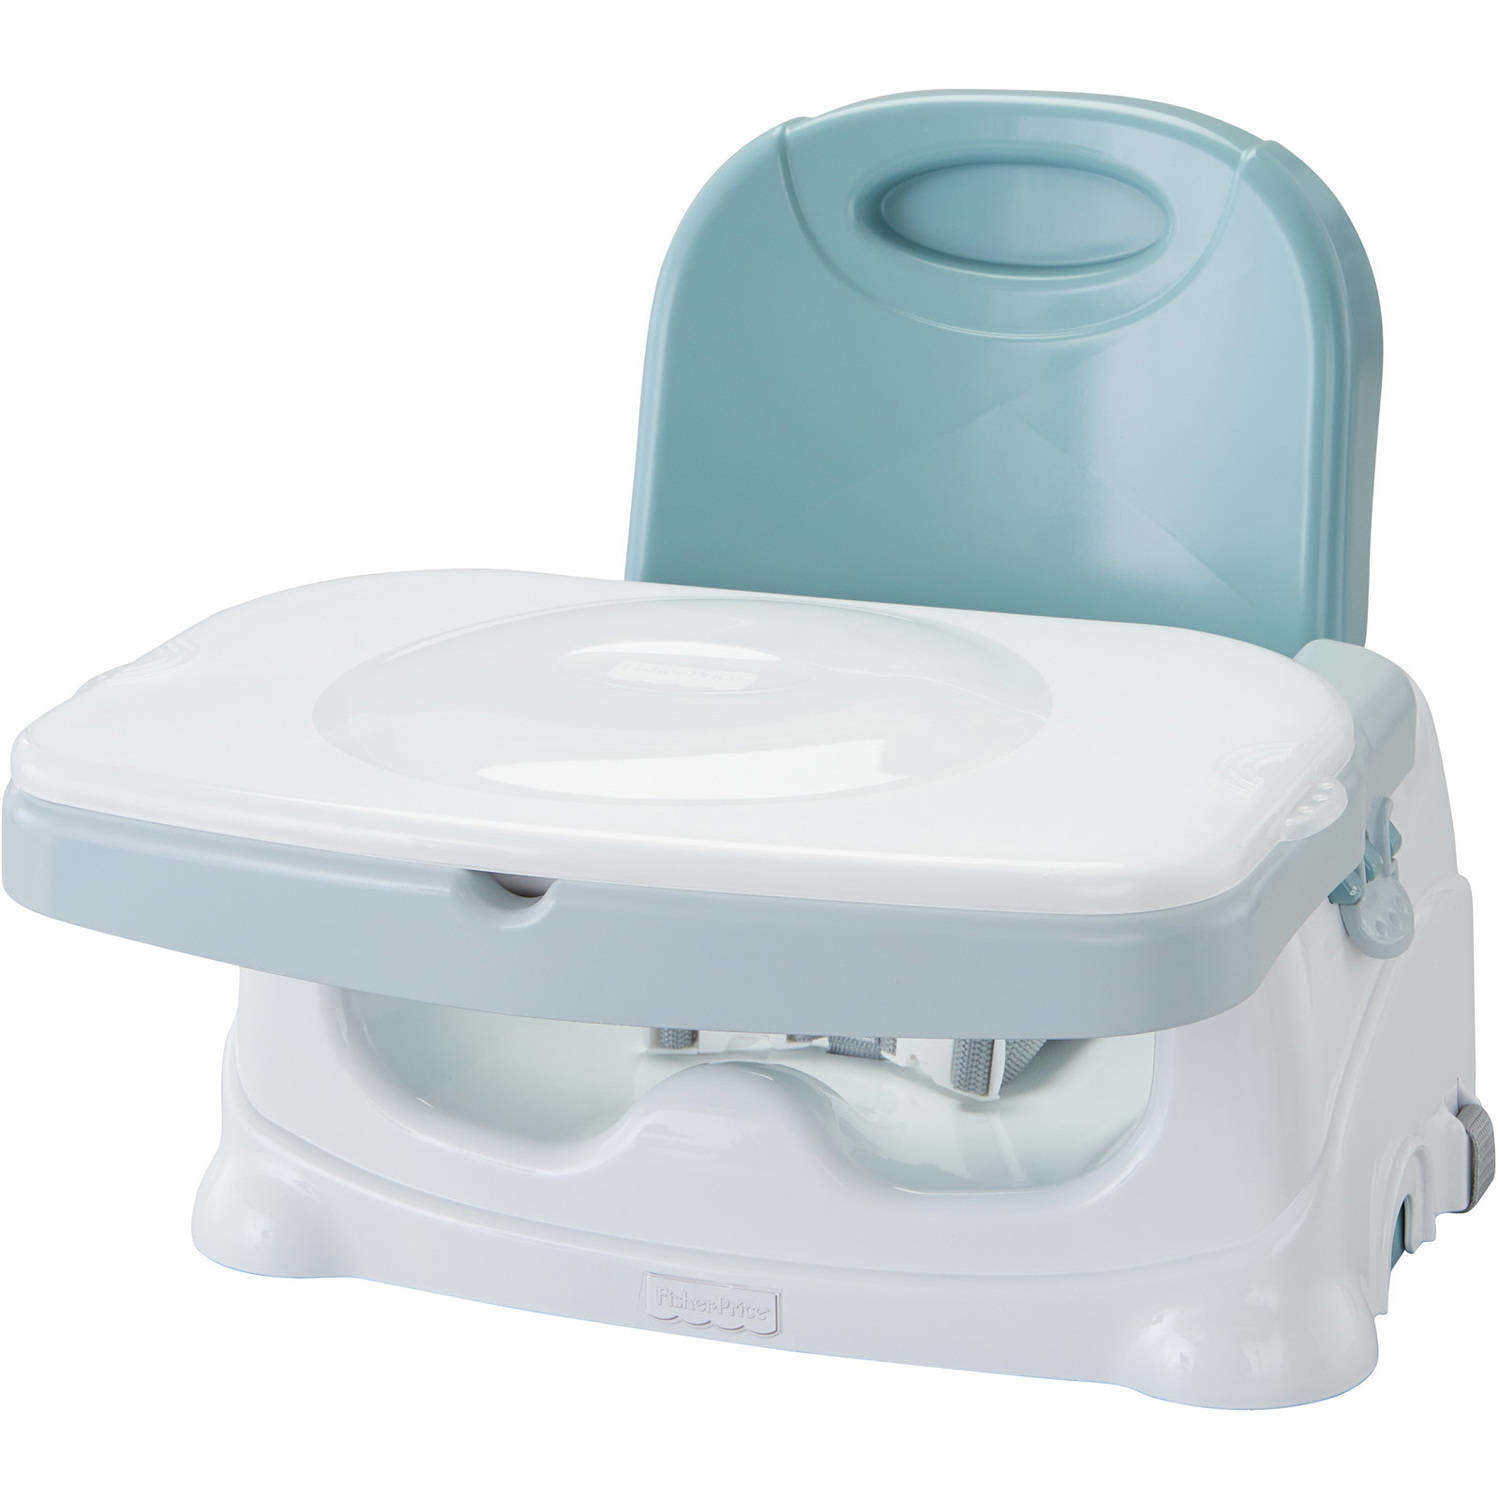 booster seat with tray walmart